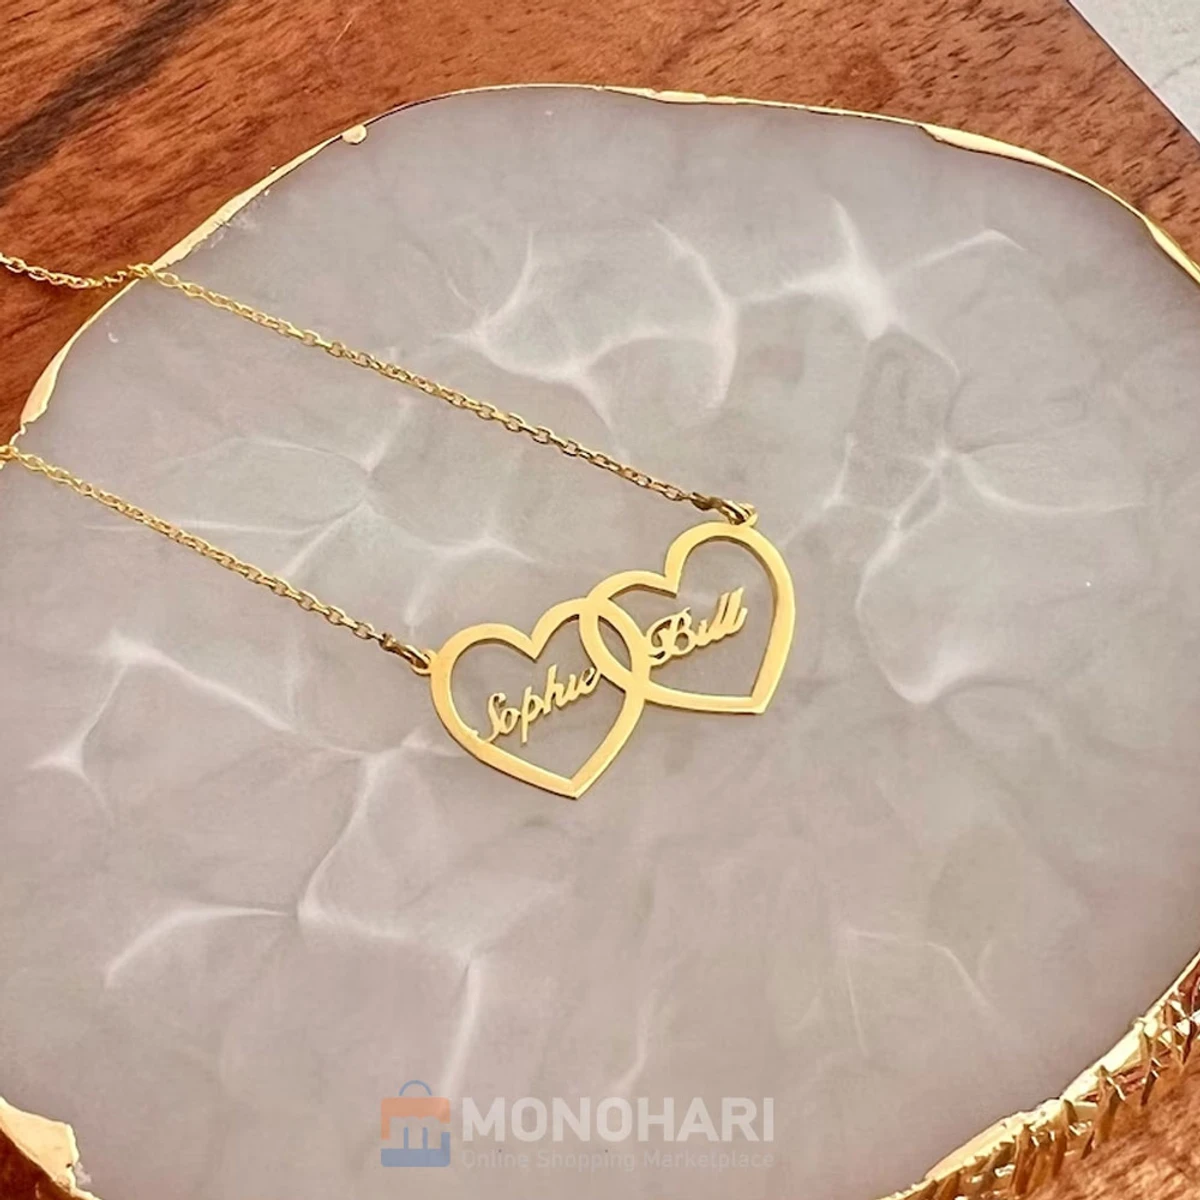 Couple Name Necklace (Sophi & Bill) Double Side Heart Shape 22K Gold Plated Customized Necklace